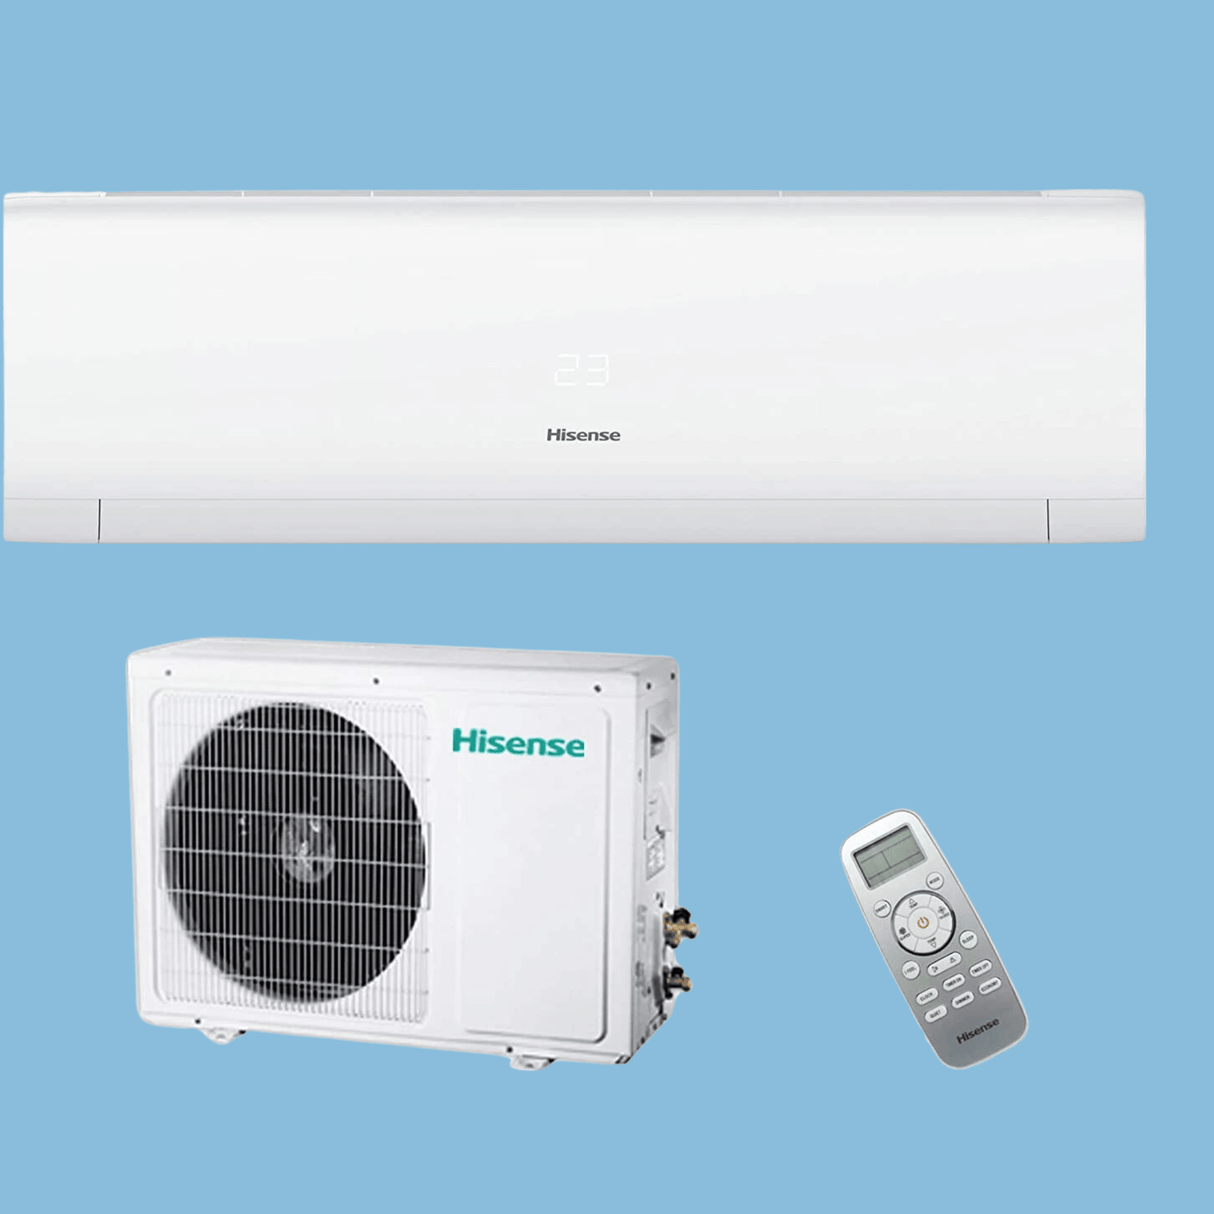 Hisense 22000 BTU Wall Split Air Conditioner with fast cooling, high efficiency and Energy saving - AS-22UW4SBBTD/CR4SBBTG00